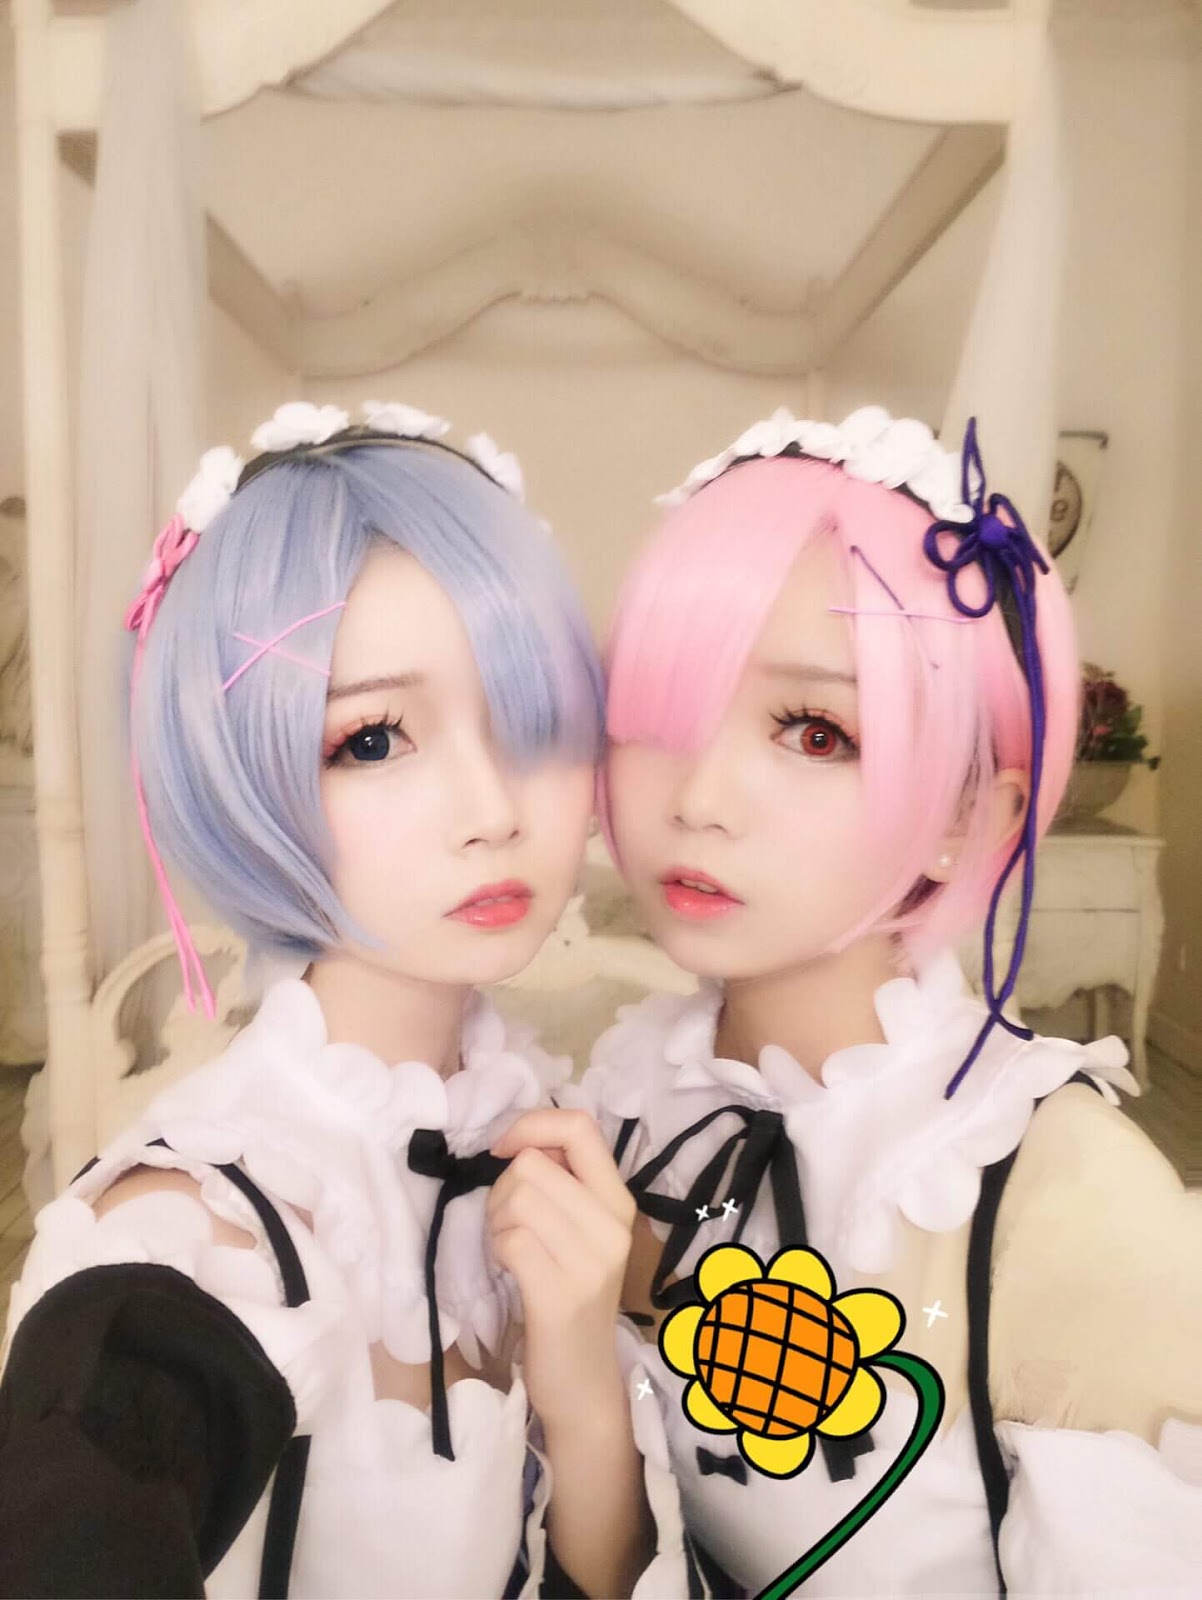 Rem and ram cosplay